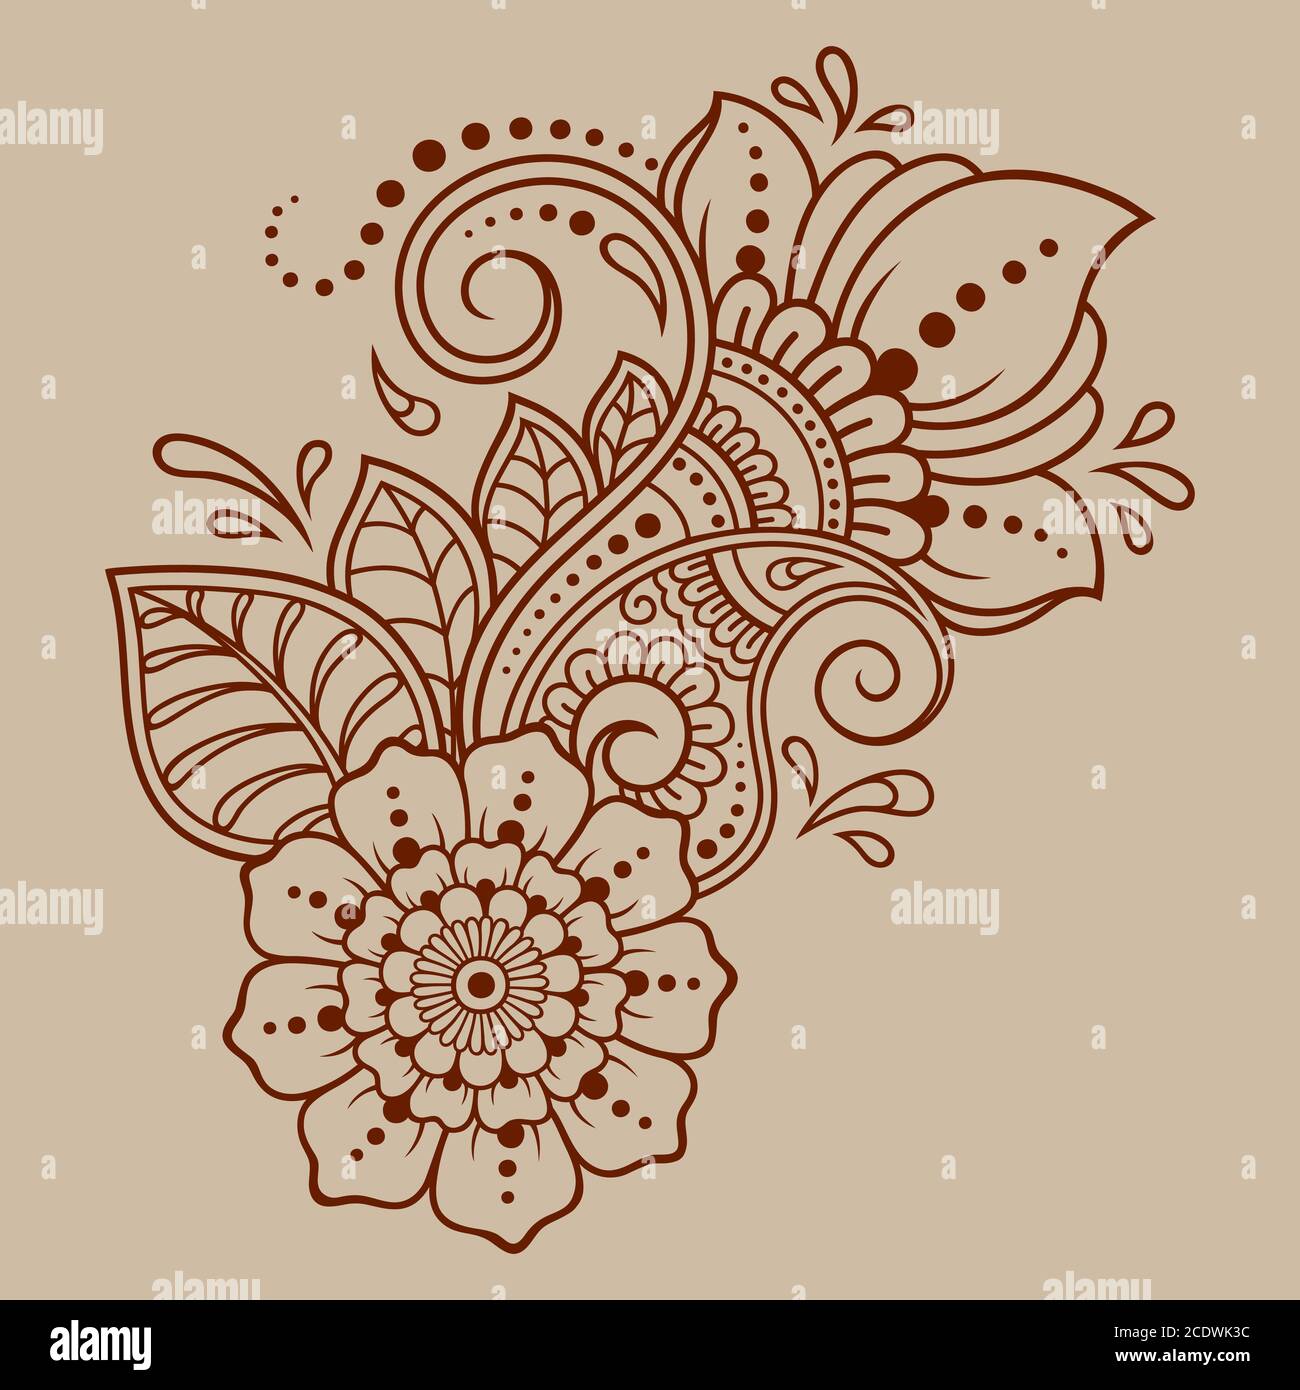 Draw Mehndi Vector Images (over 3,900)